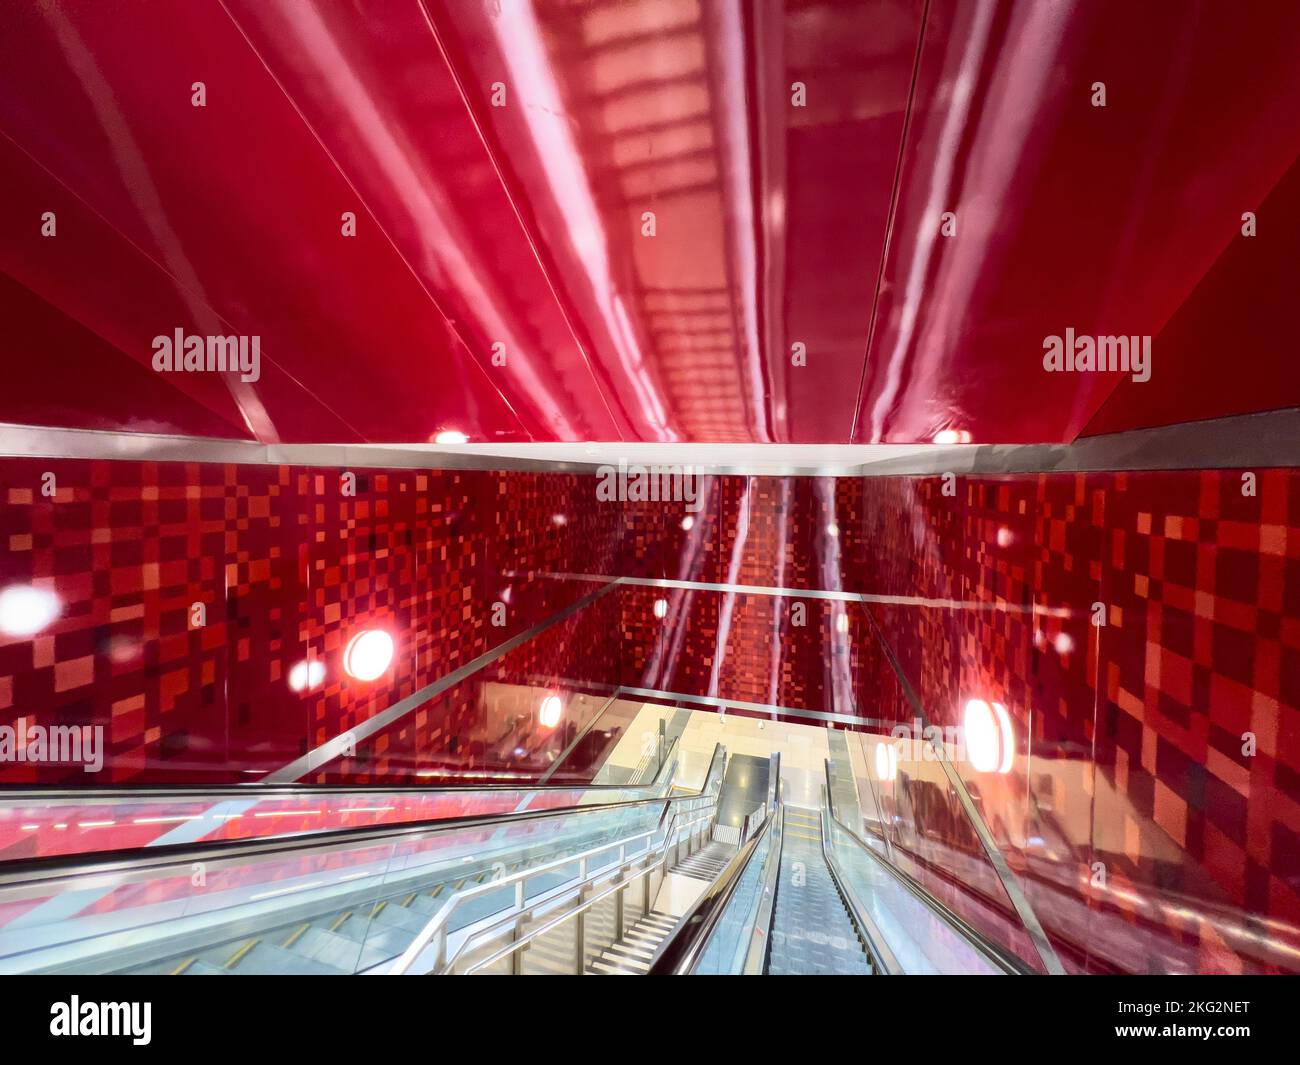 Inside an underground train station. A long escalator travel deep down in red colour wall interior design. Stock Photo